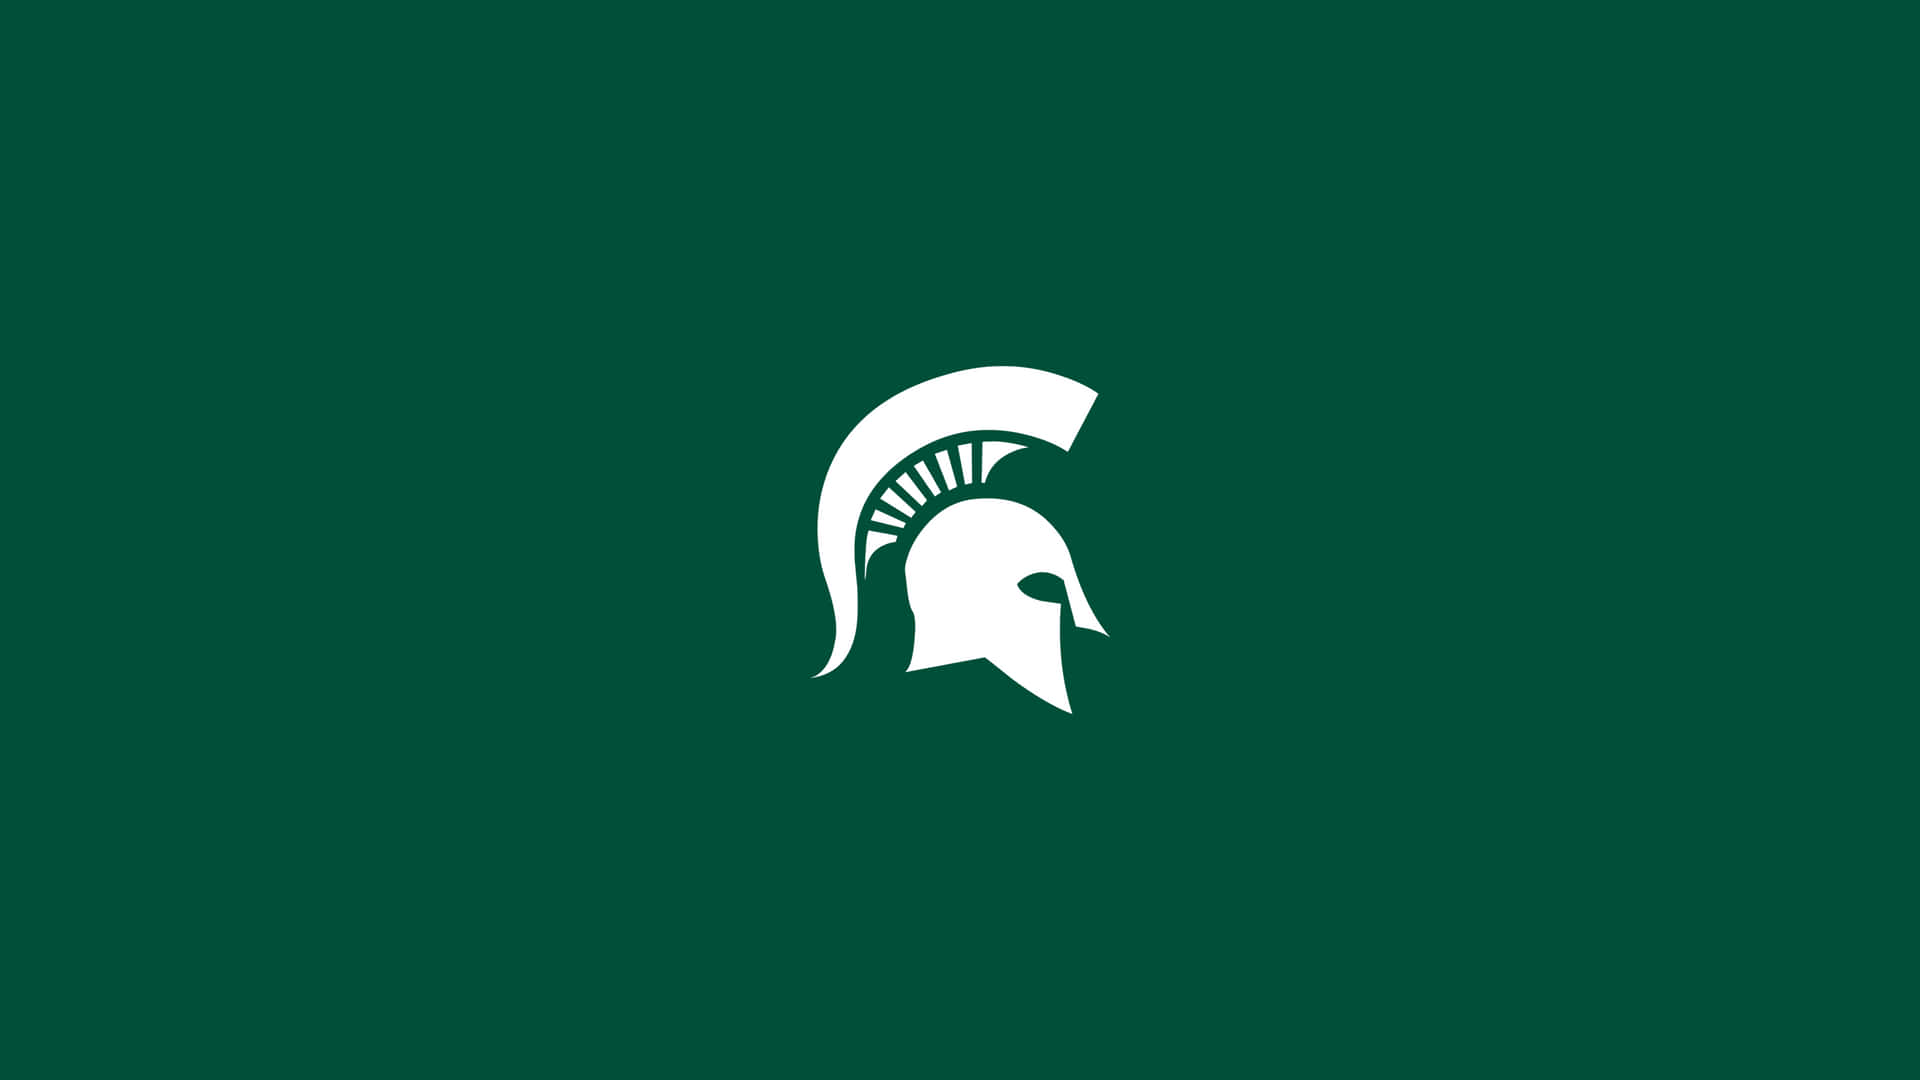 Michigan State Spartans Logo On A Green Background